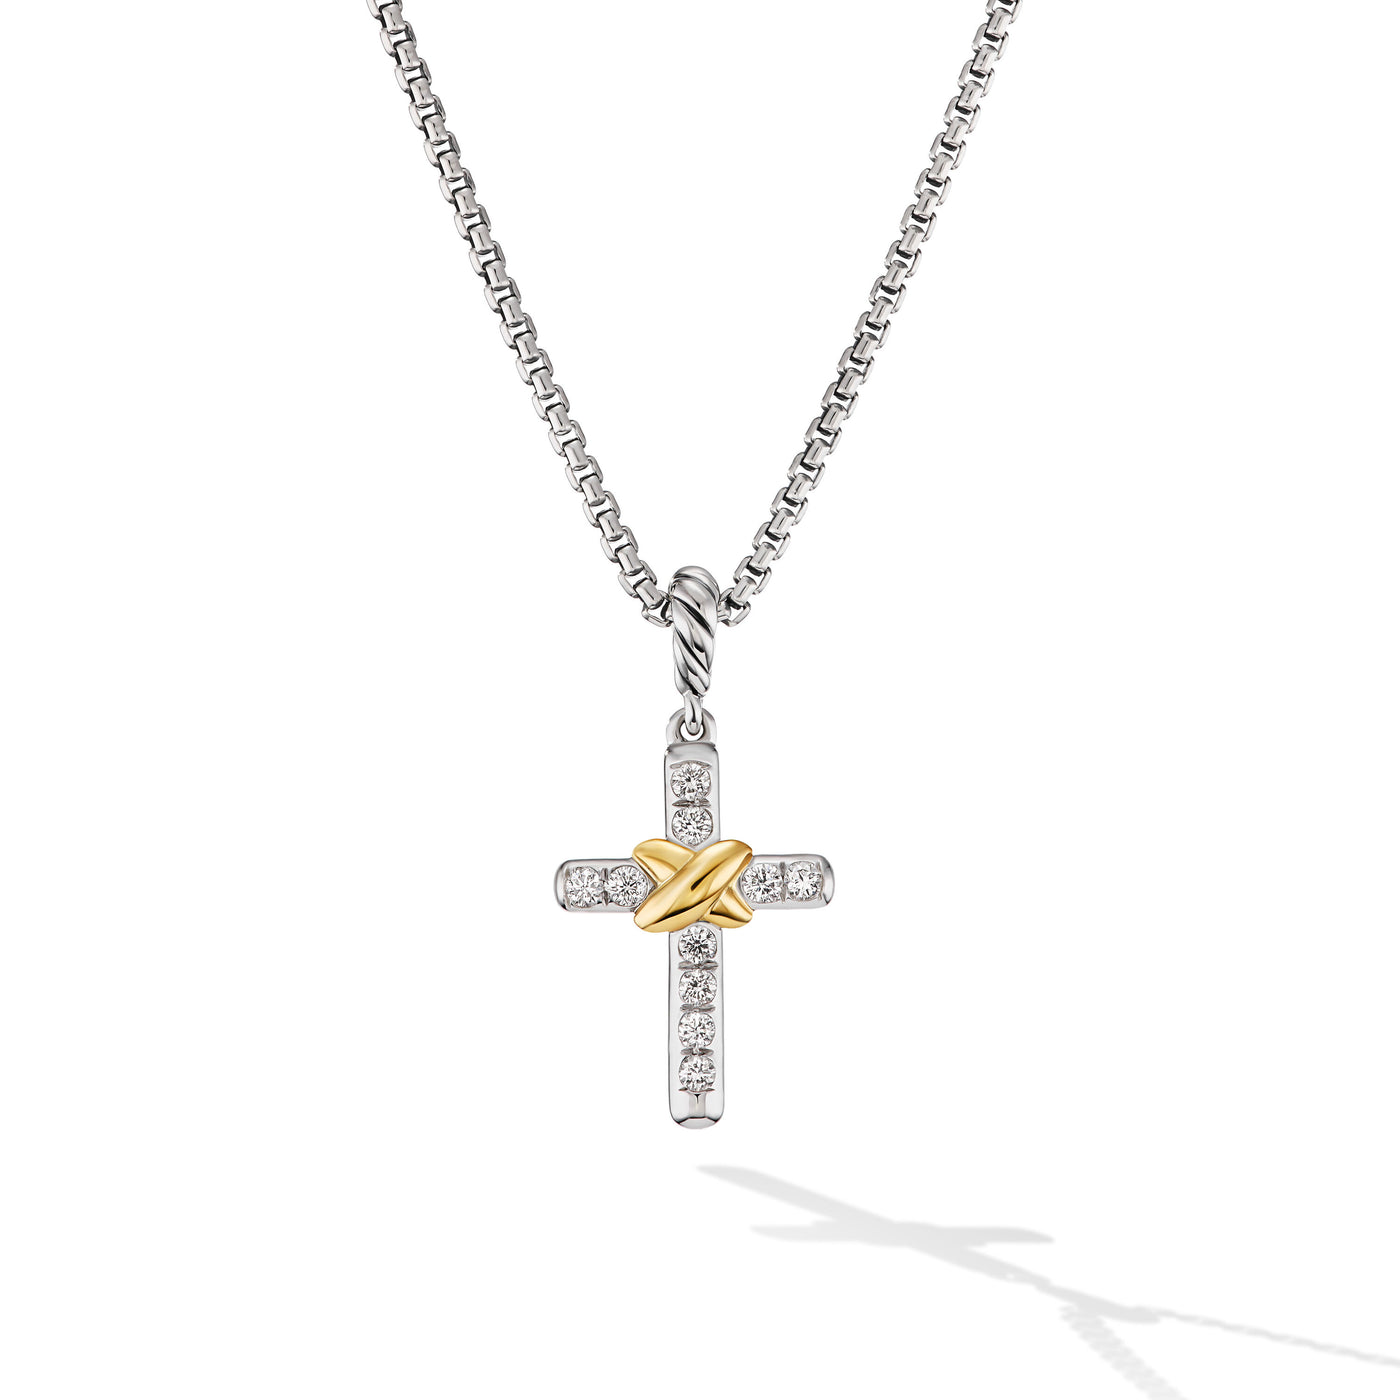 Petite Cross Necklace in Sterling Silver with 18K Yellow Gold with Diamonds\, 20.8mm